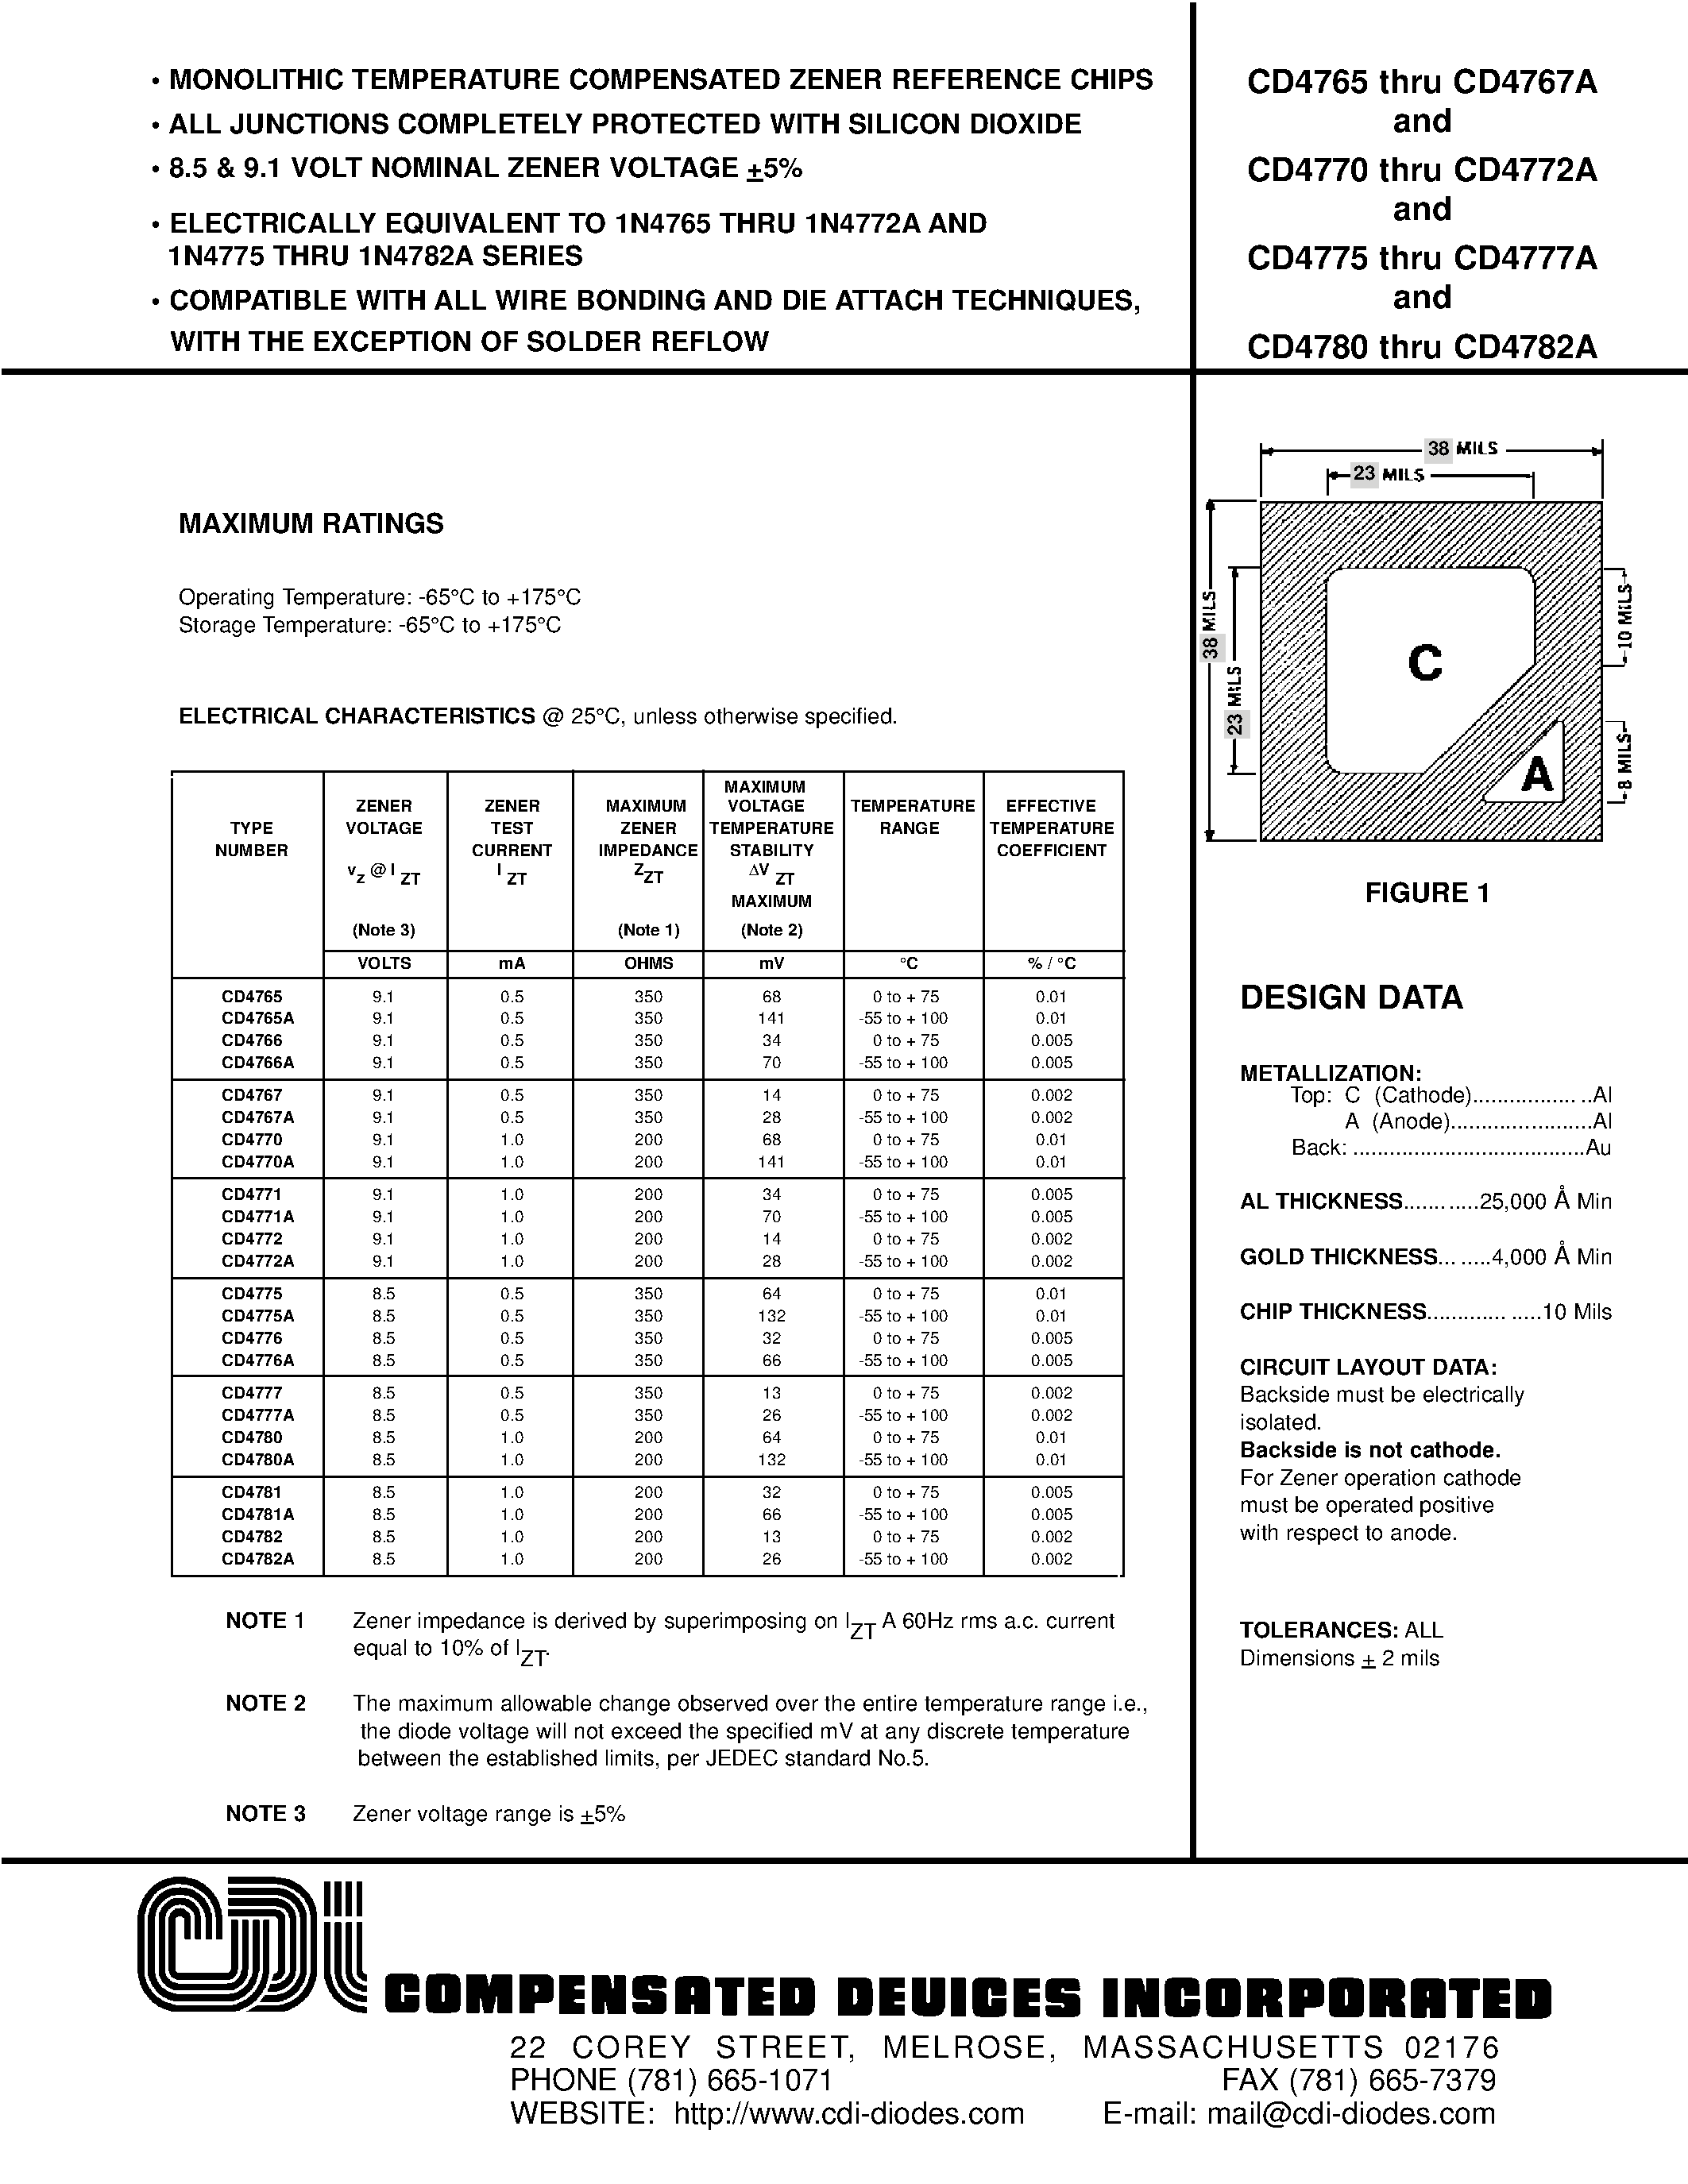 Datasheet CD4772 - MONOLITHIC TEMPERATURE COMPENSATED ZENER REFERENCE CHIPS page 1